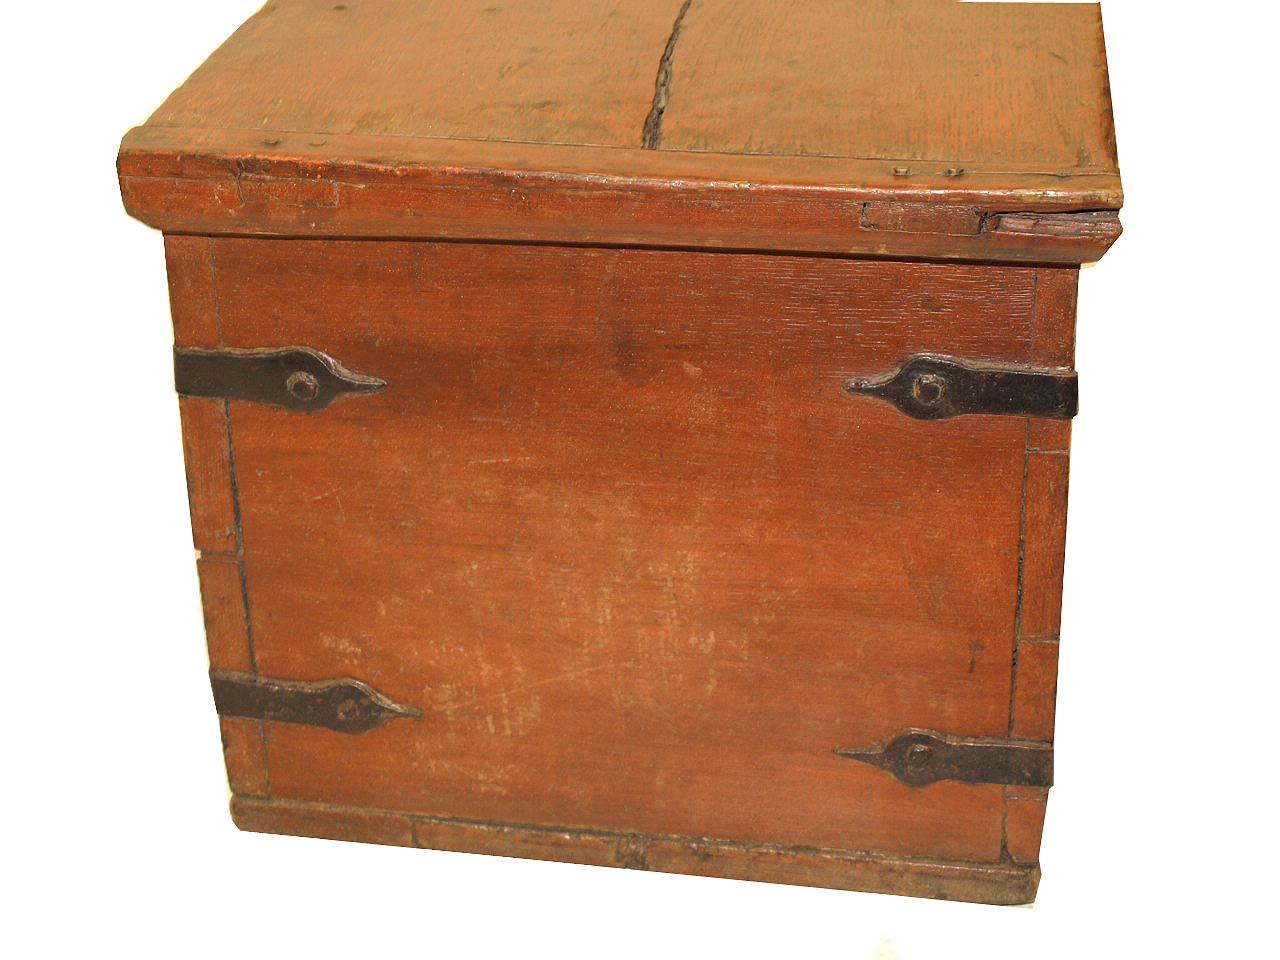 Painted steel bound trunk, with hand wrought steel straps on all sides, open interior with candle box on right, original steel hinges. The top has ''bread board'' ends and a shrinkage crack ( see photo ) on the left side. Original steel escutcheon.